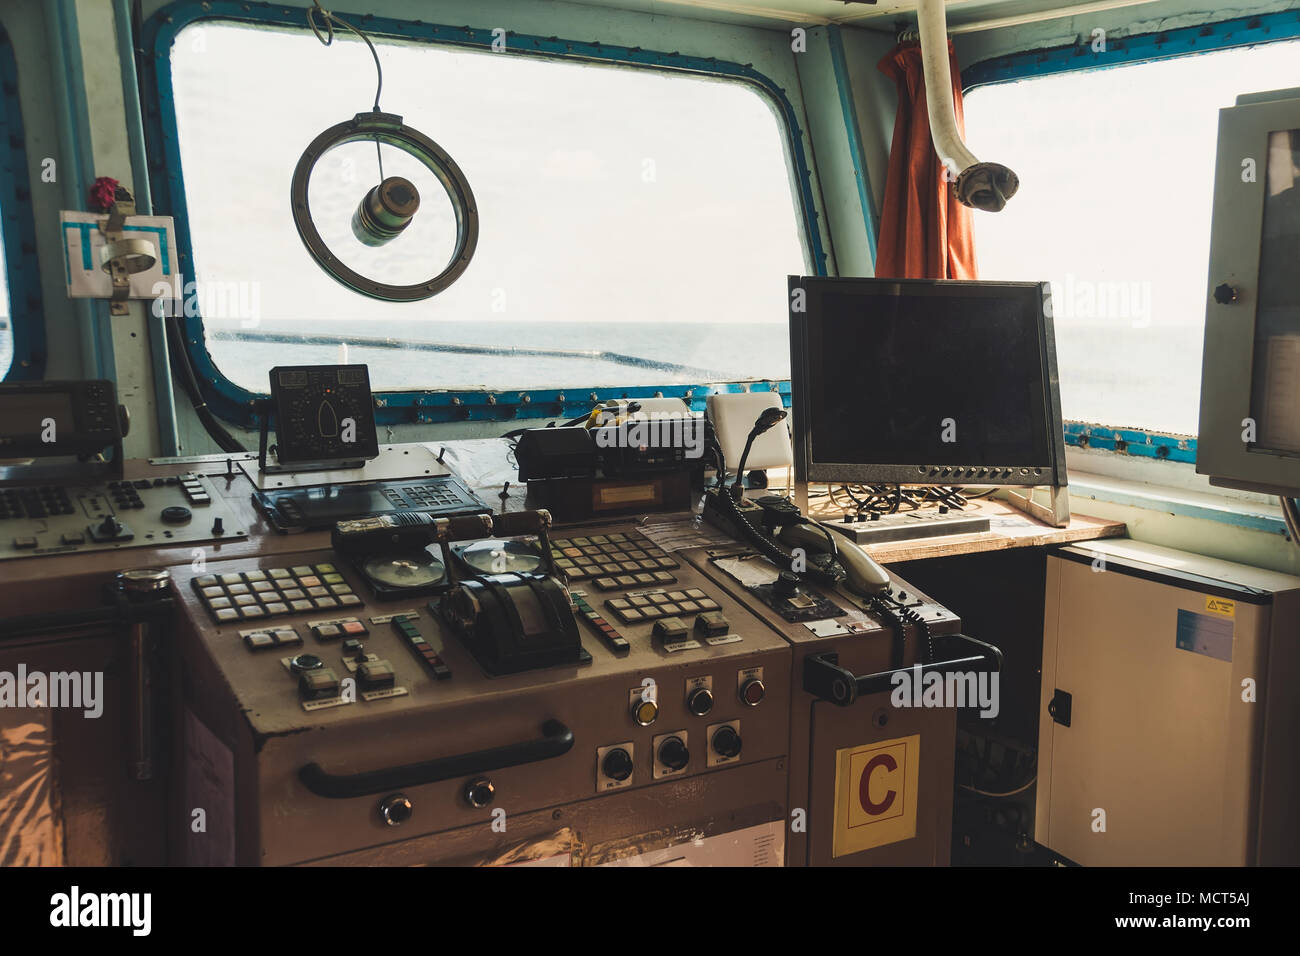 Captain's Cabin View From The Inside, Point Of View Shot. panel of ship devices Stock Photo